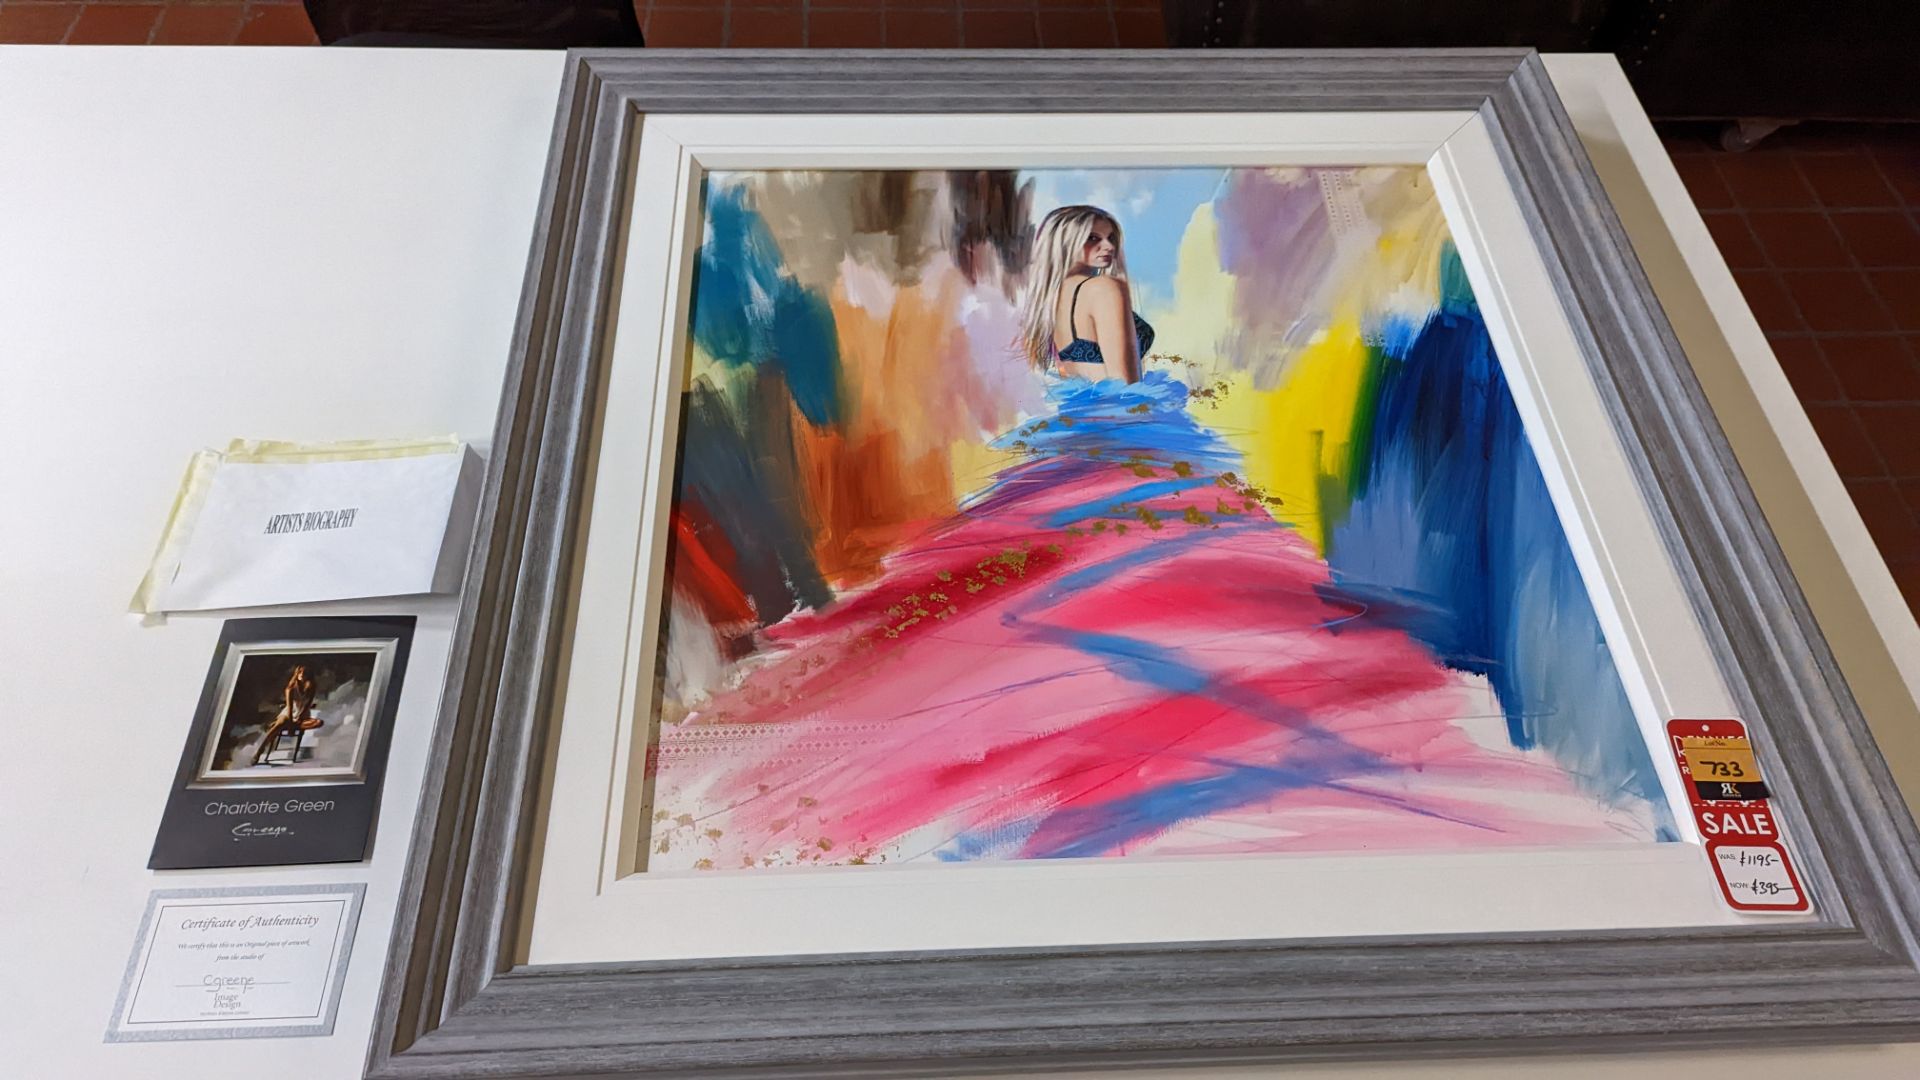 Framed modern/contemporary painting of a lady by C Green. Originally priced at £1,195. Dimensions in